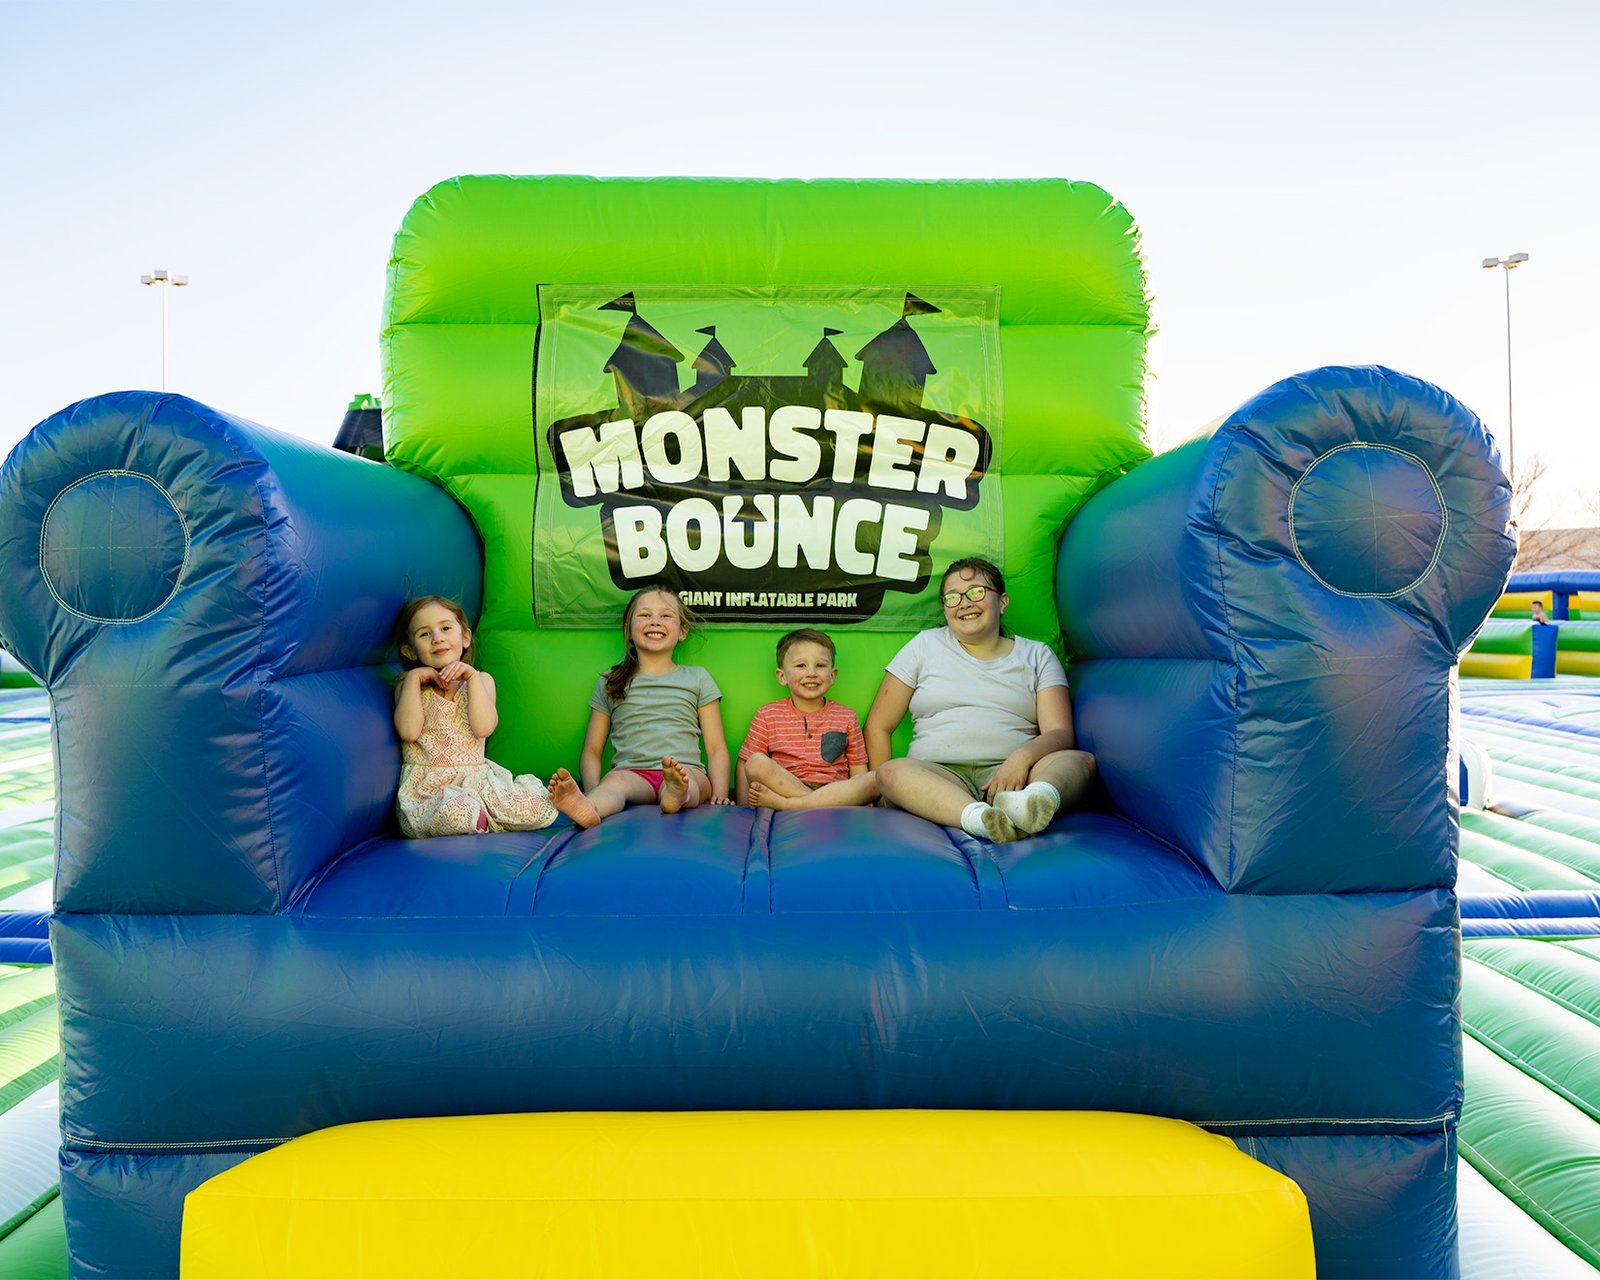 Little kids smiling and sitting on a giant inflatable chair on one of the world's largest bounce houses